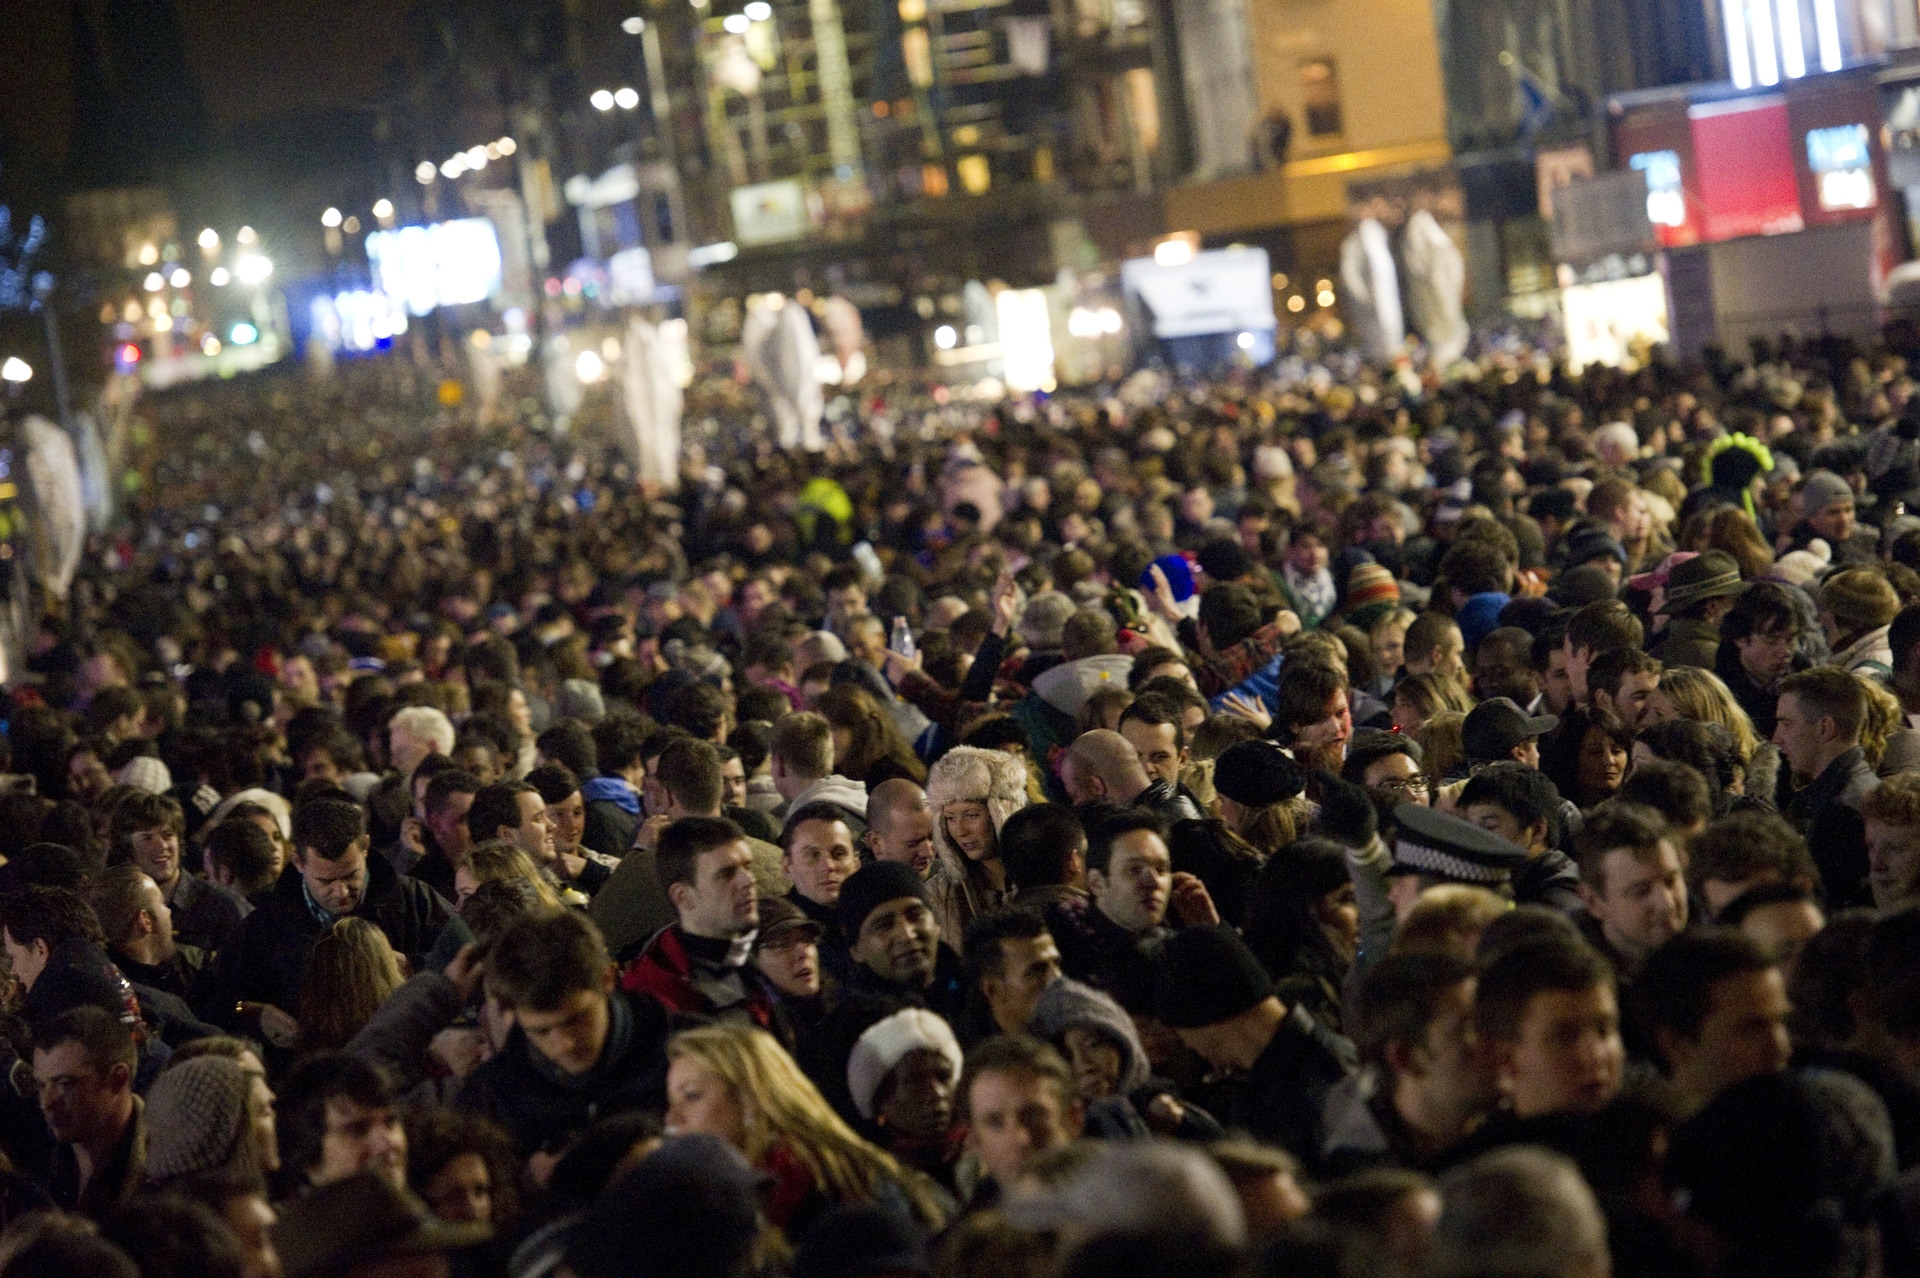 The famous Hogmanay street party is due to return.